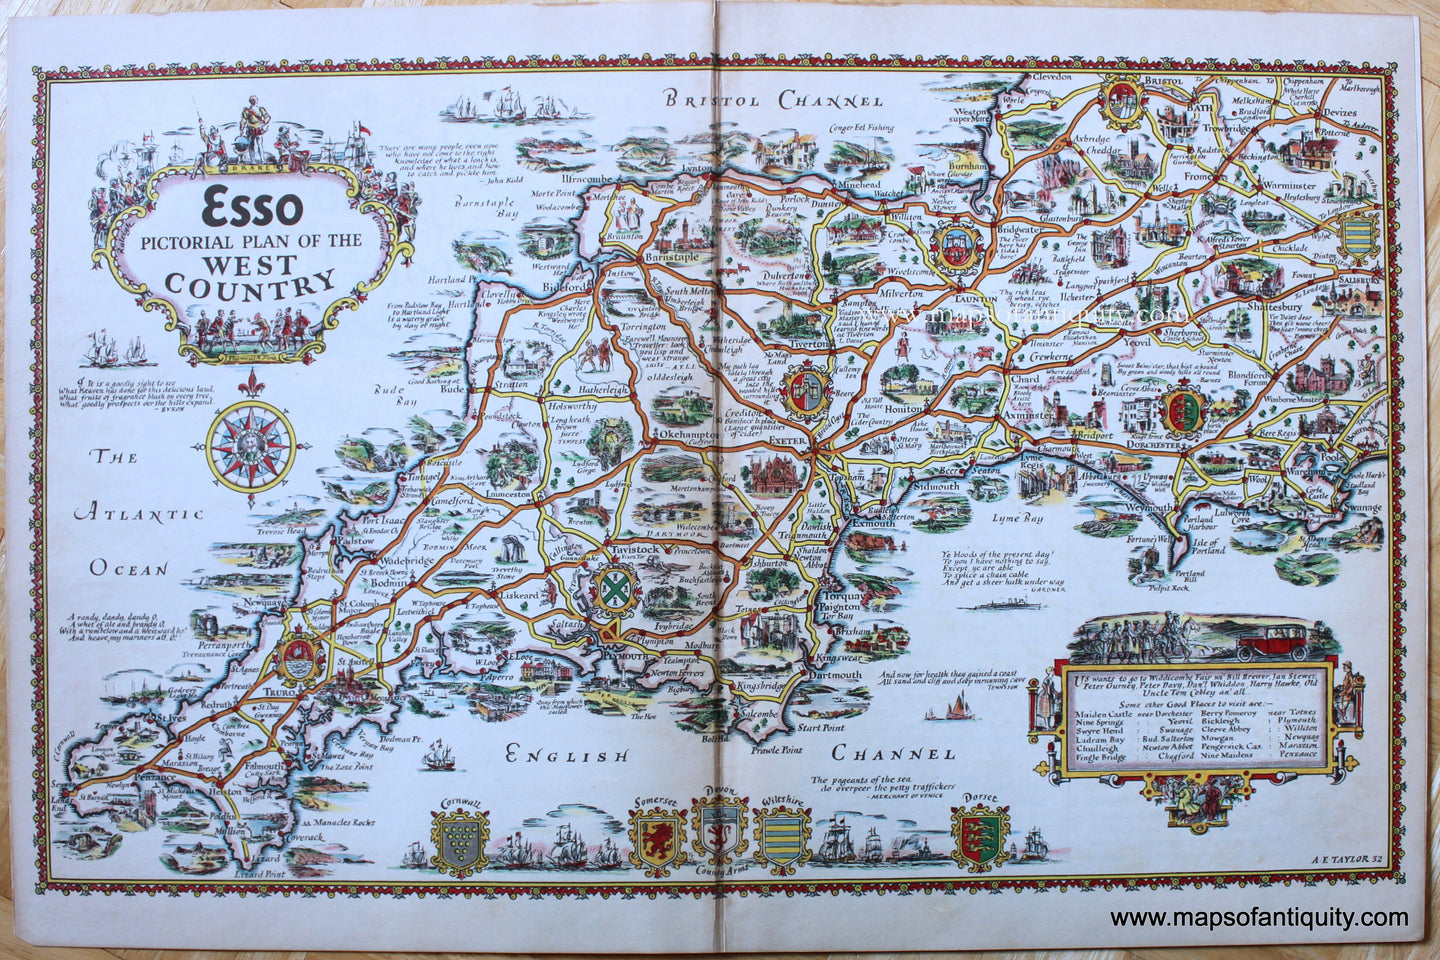 Genuine-Antique-Pictorial-Map-Esso-Pictorial-Plan-of-the-West-Country-1932-A.E.-Taylor-Maps-Of-Antiquity